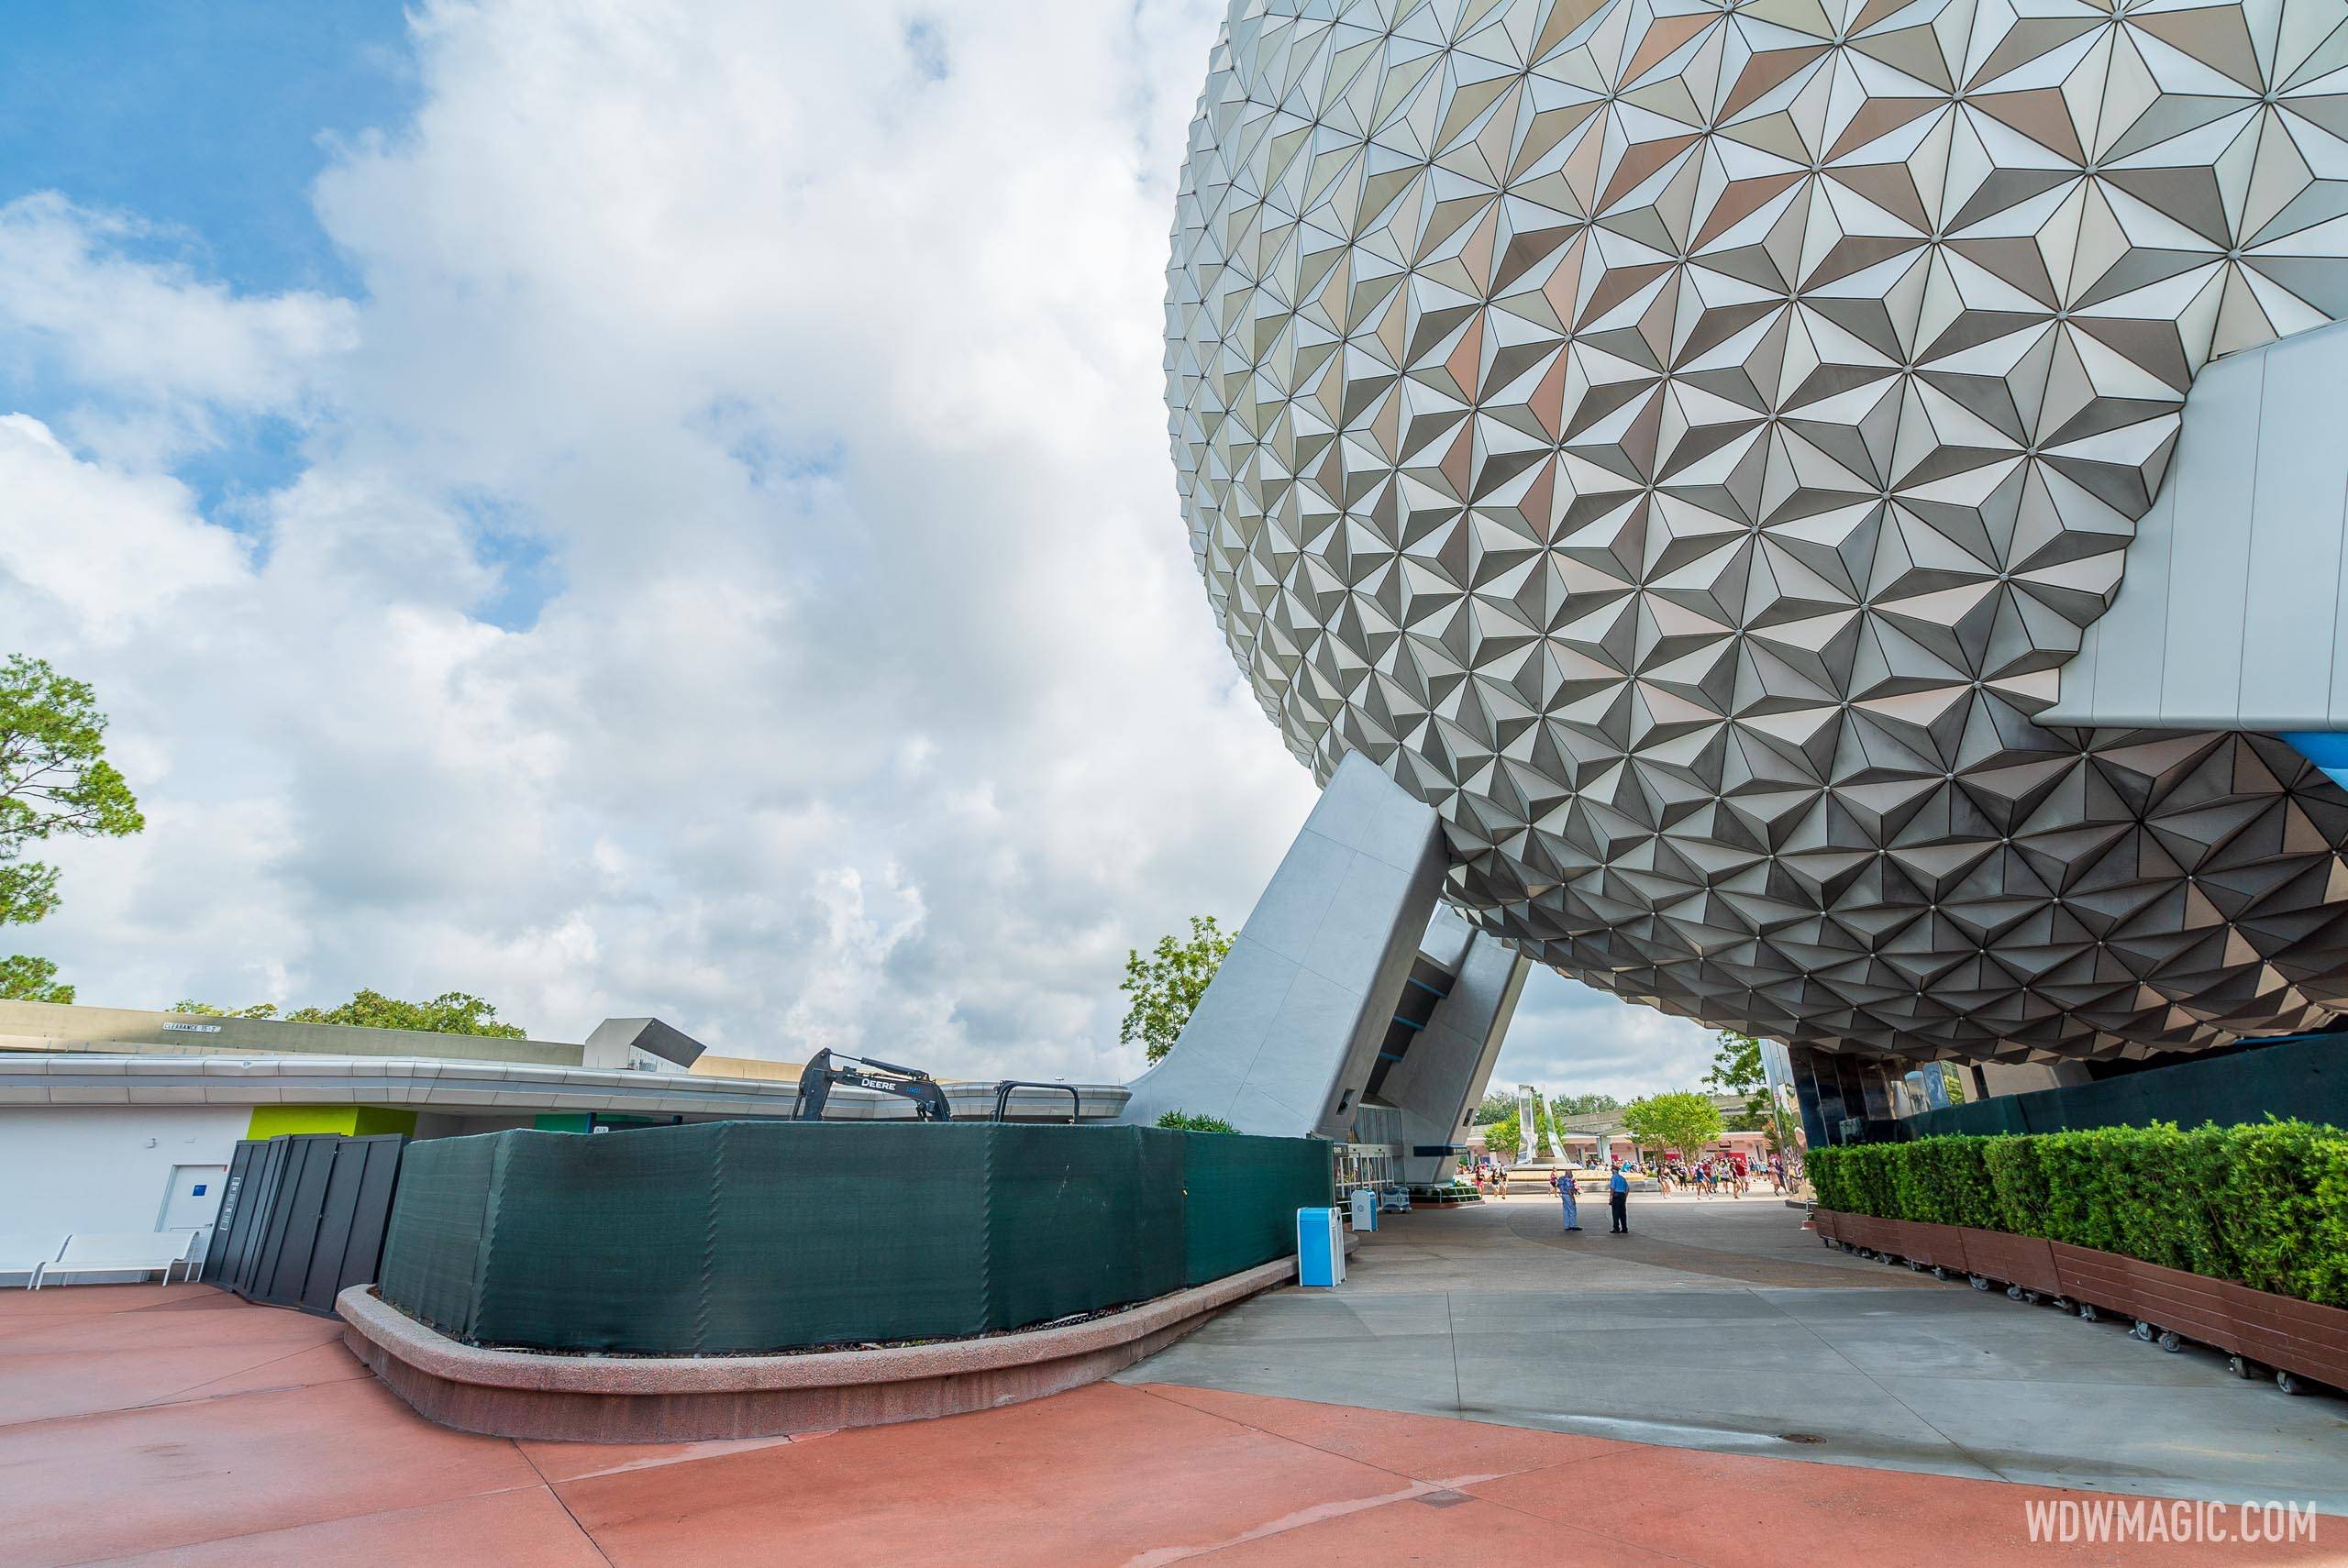 Spaceship Earth West restrooms closed for refurbishment